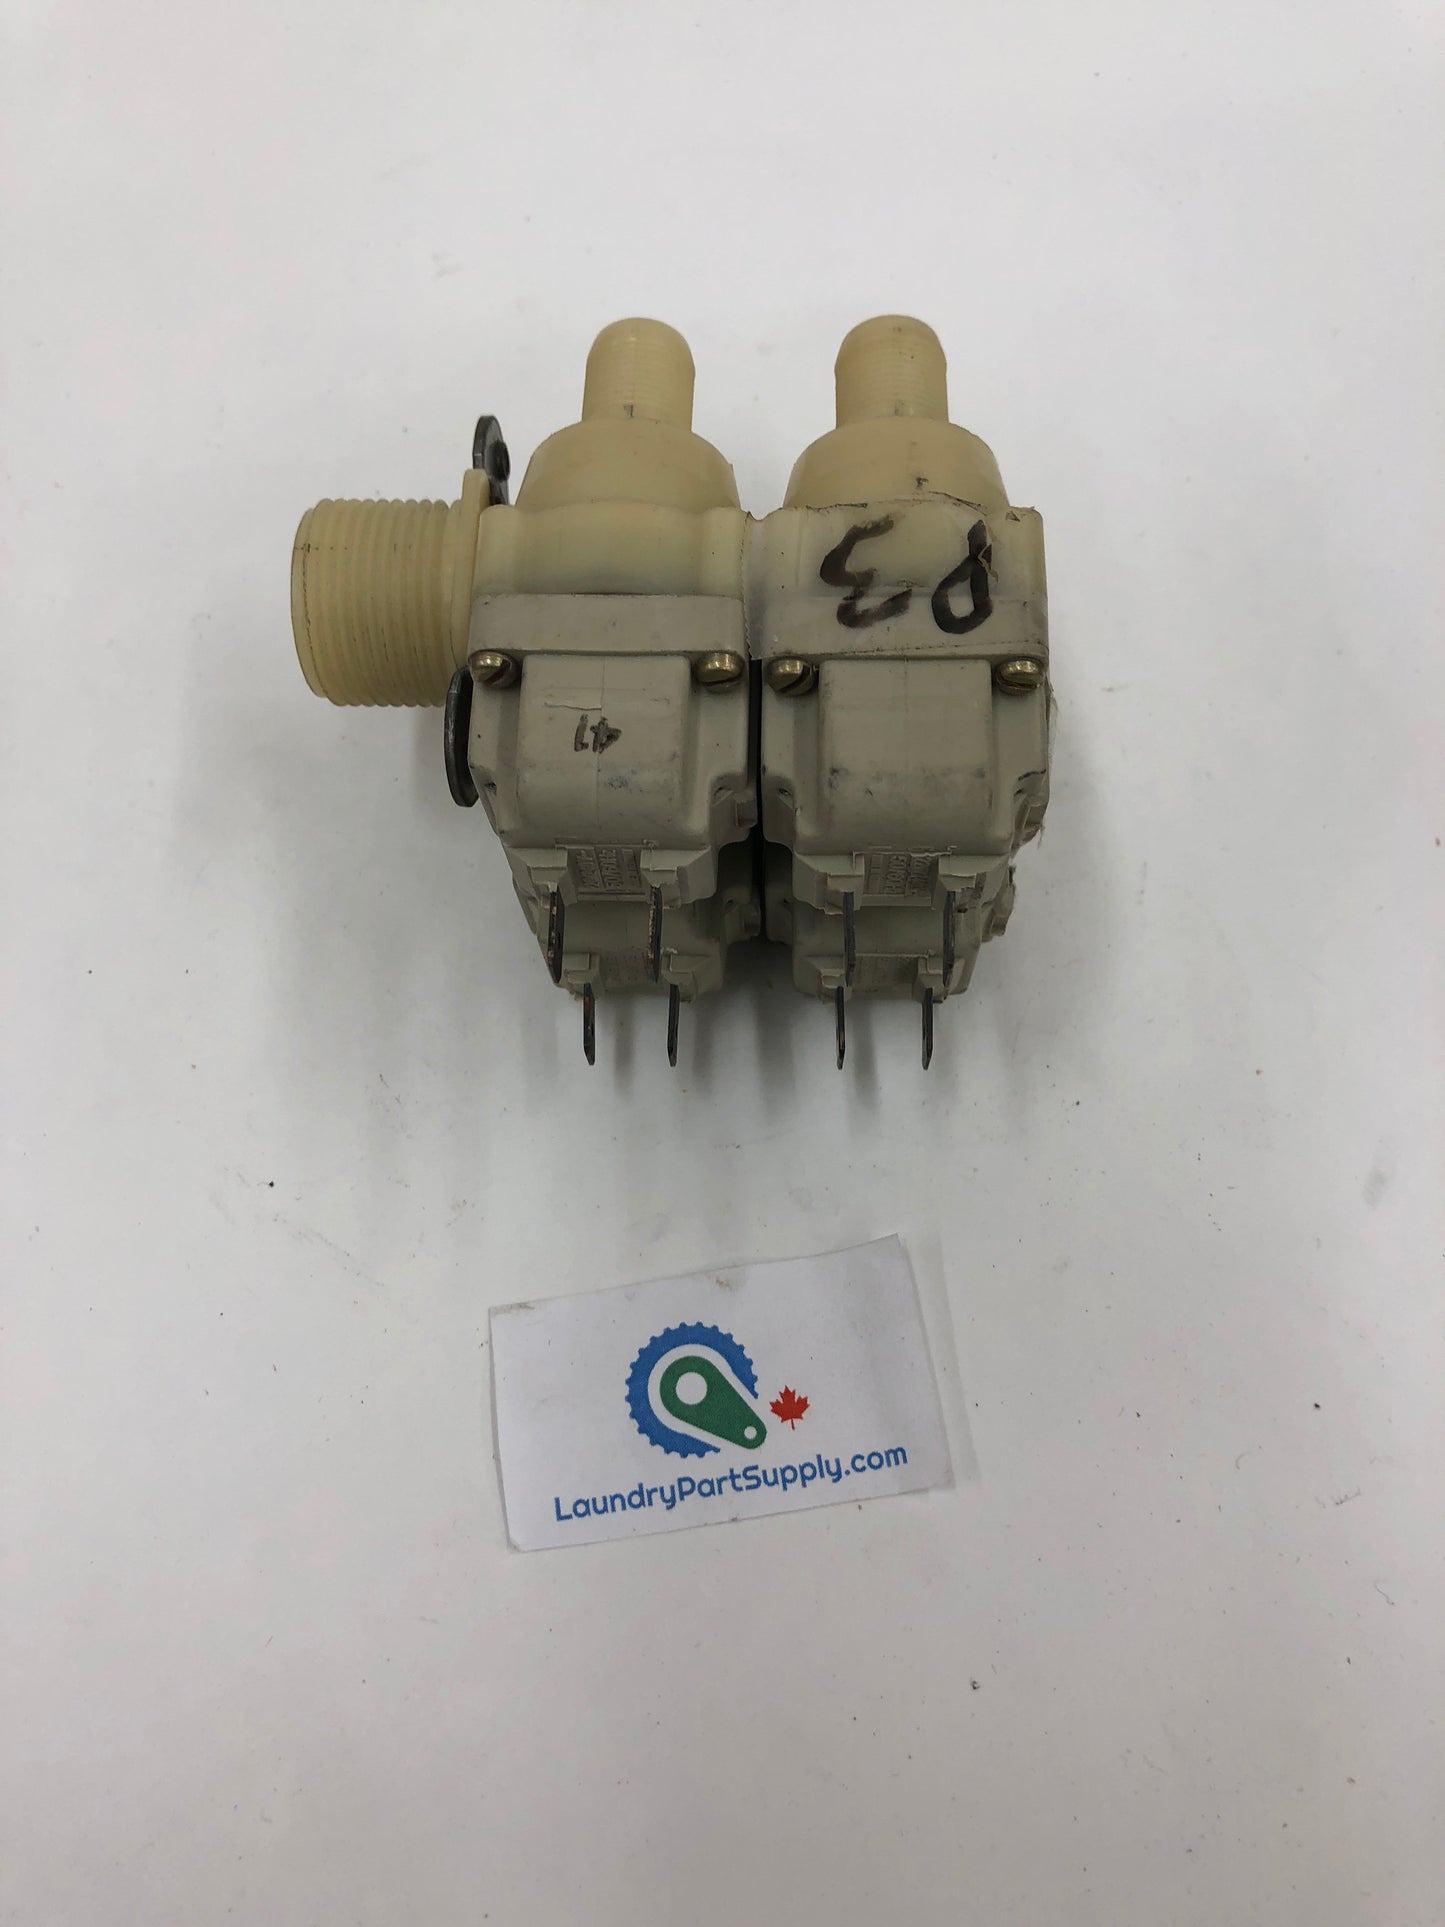 240 V. 4-way Complete Inlet Valve, can c